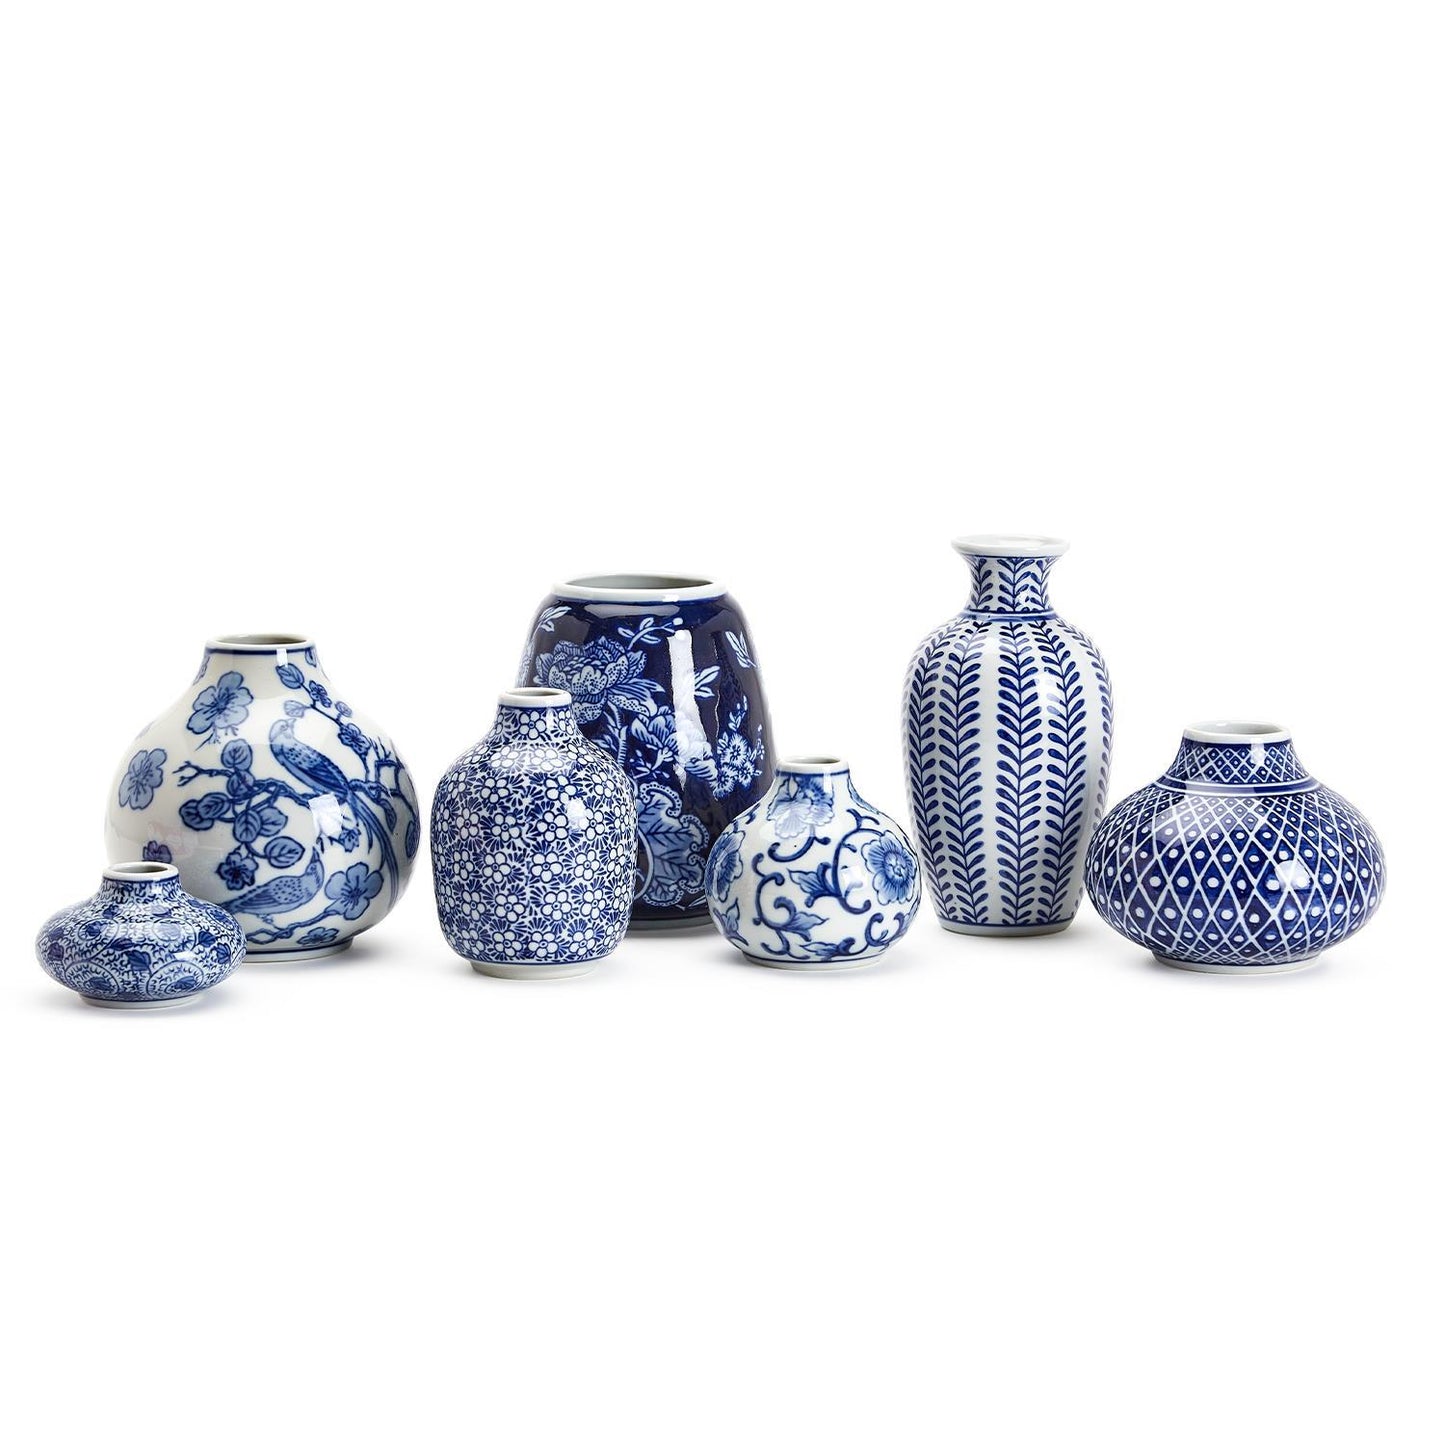 Two's Company Blue & White Vases Set of 7